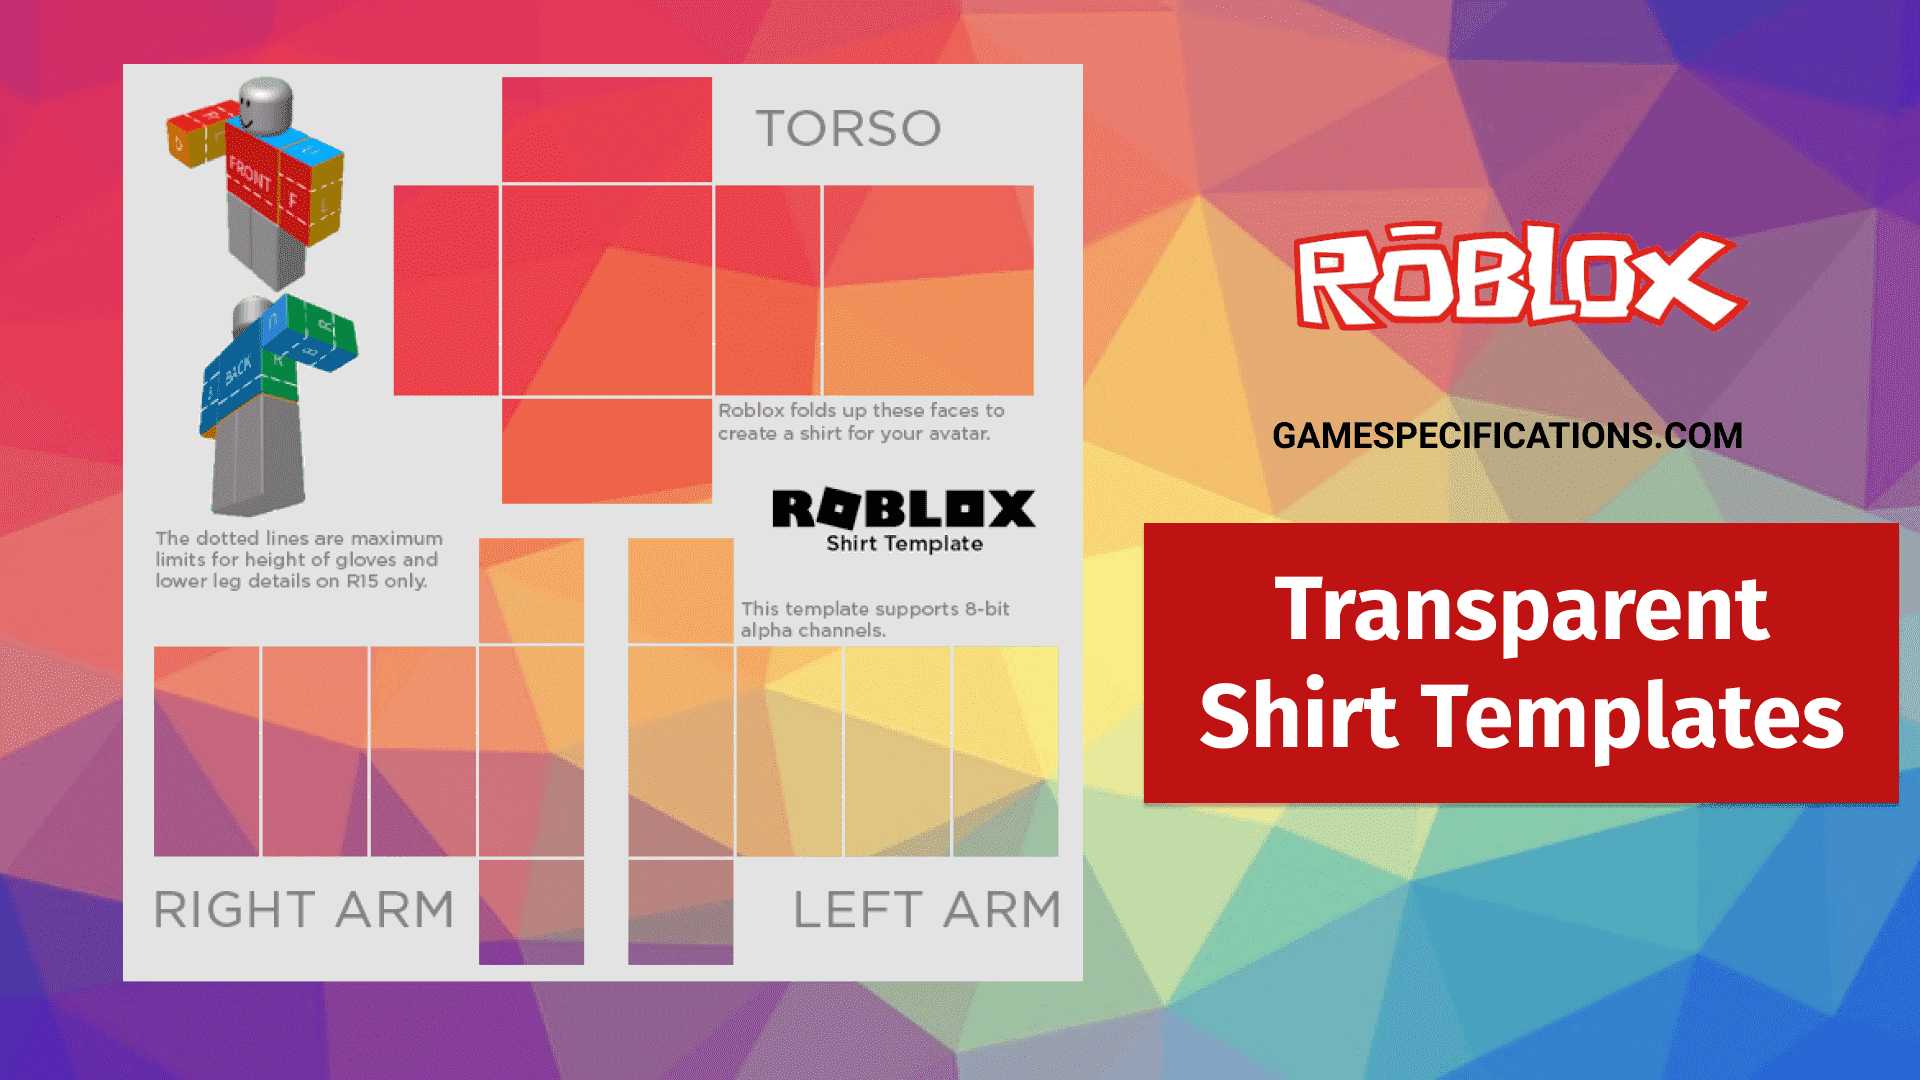 Roblox Transparent Shirt Templates And How To Make Them Game Specifications - roblox glove template